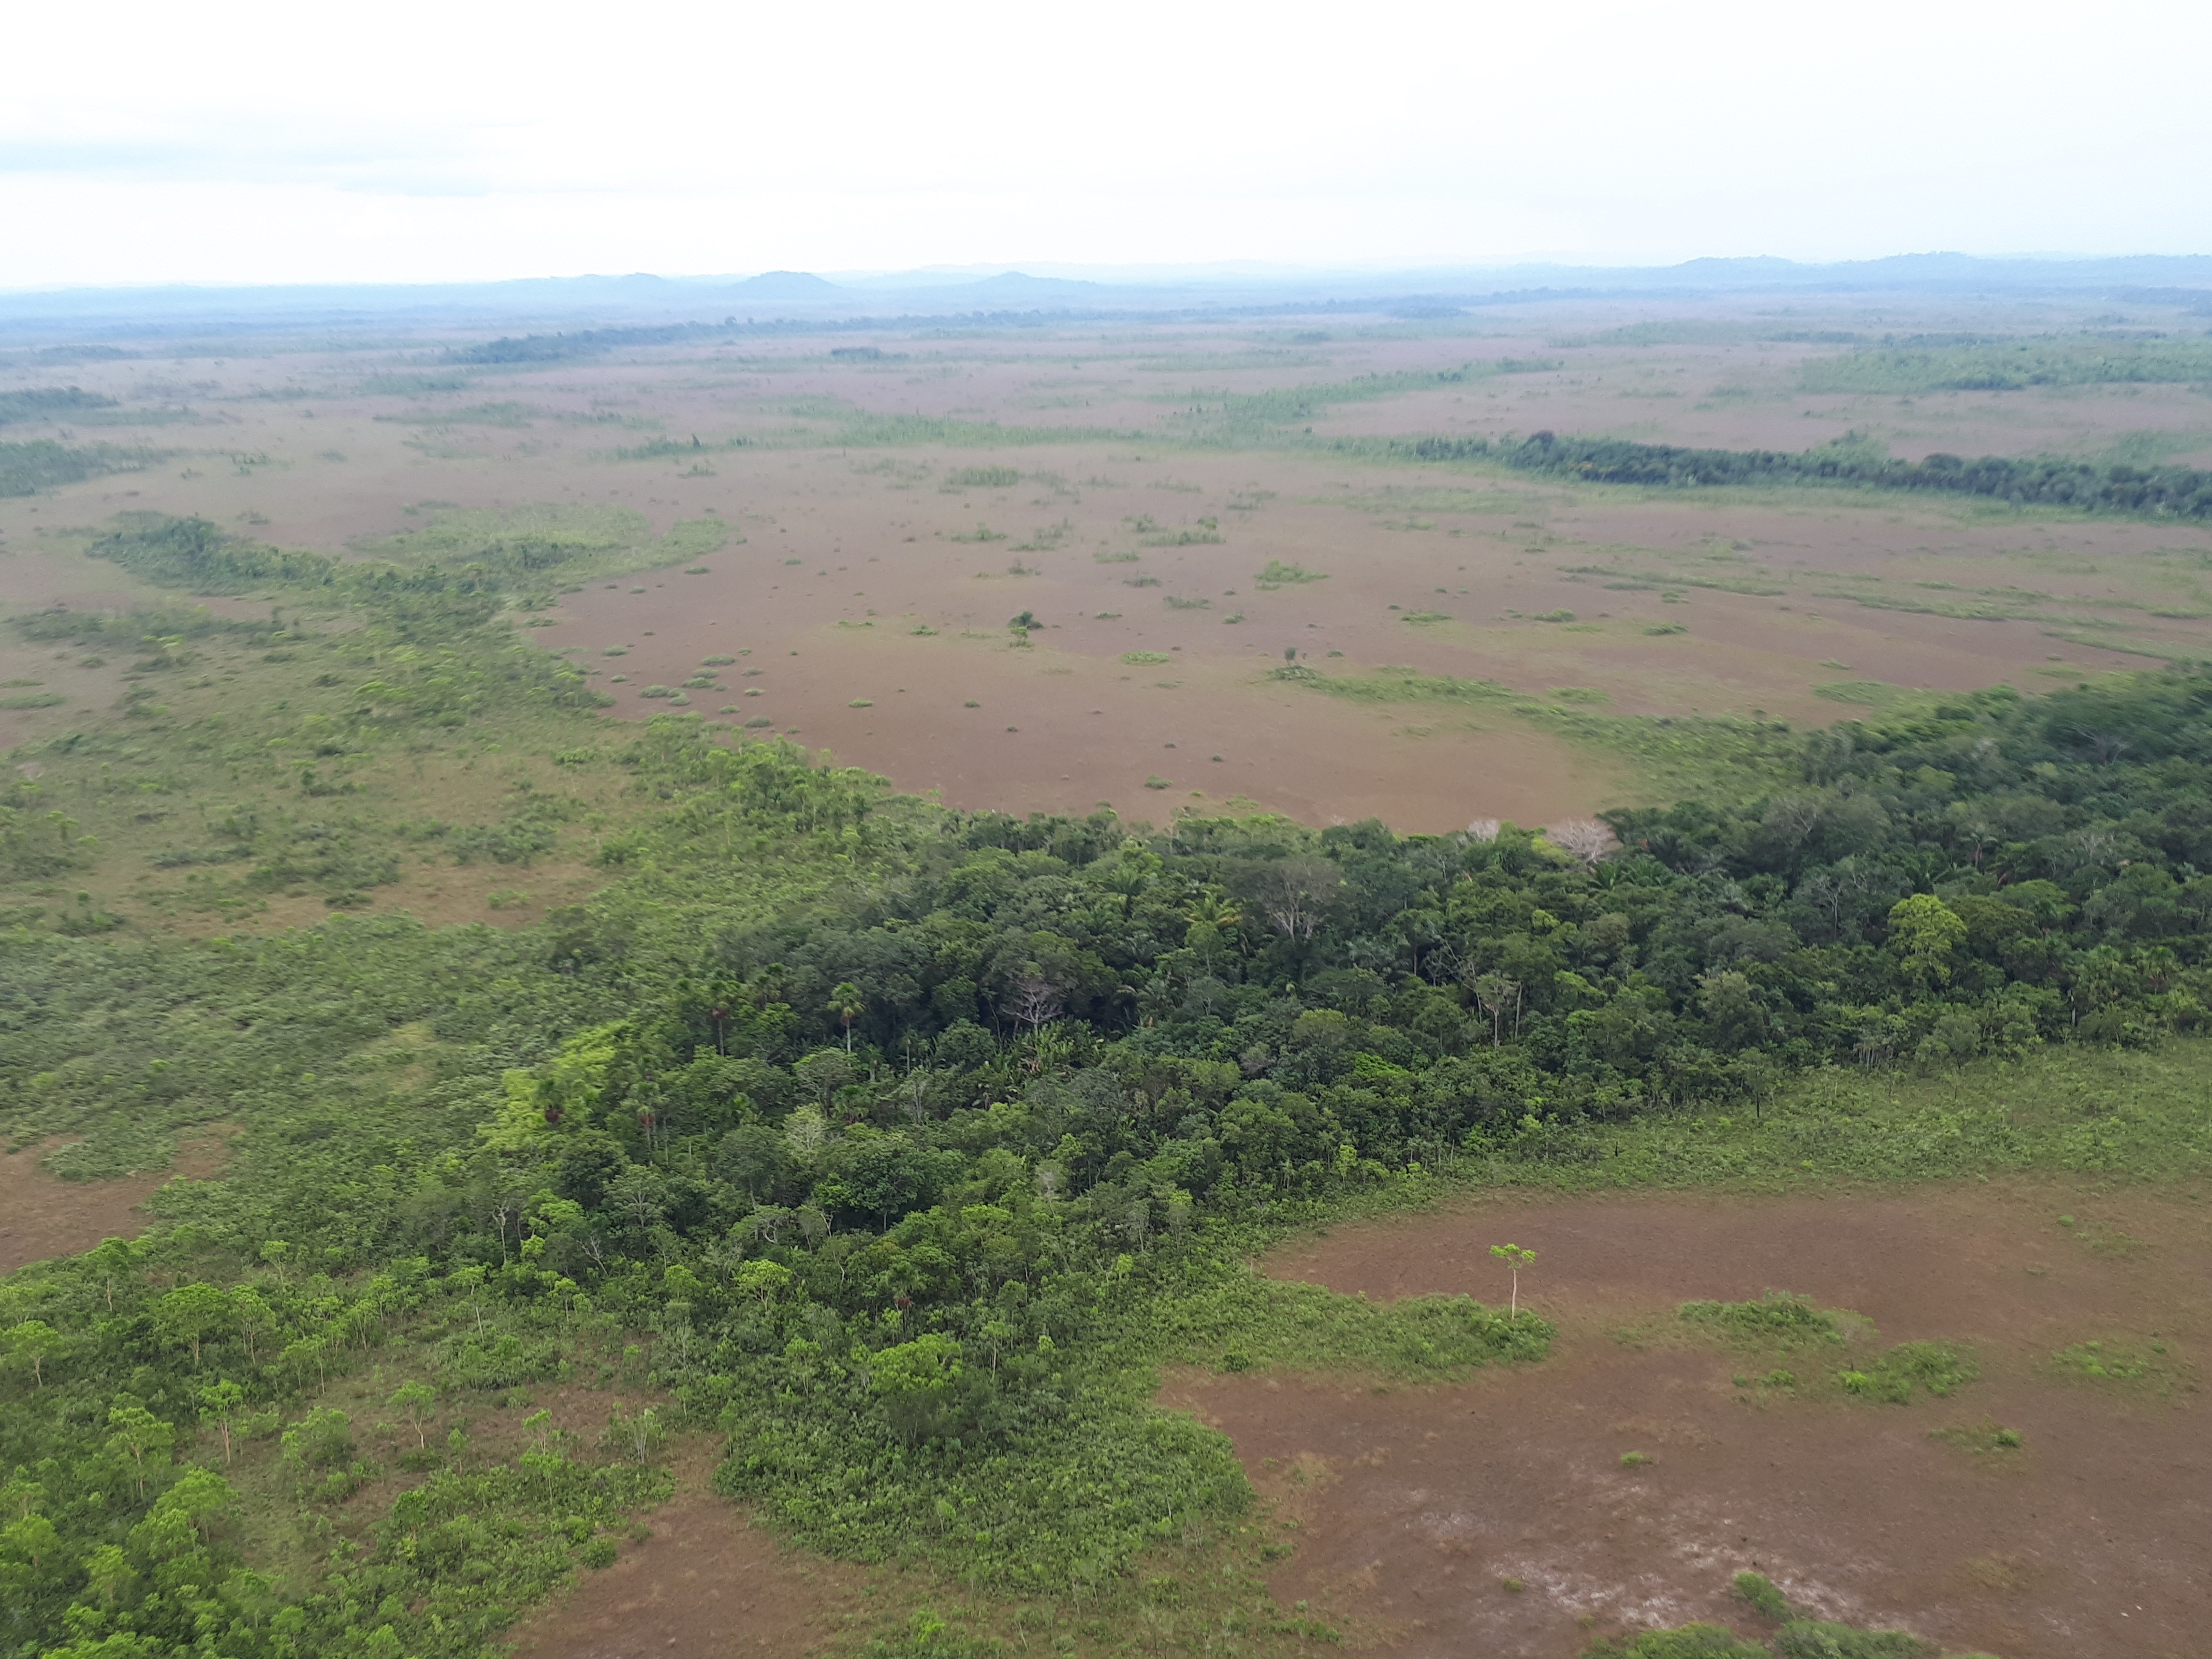 An aerial view of the Brazilian Amazon shows the lush forest and its edges, which are expected to become more savanna-like with projected climate changes. (Wesley Araujo)